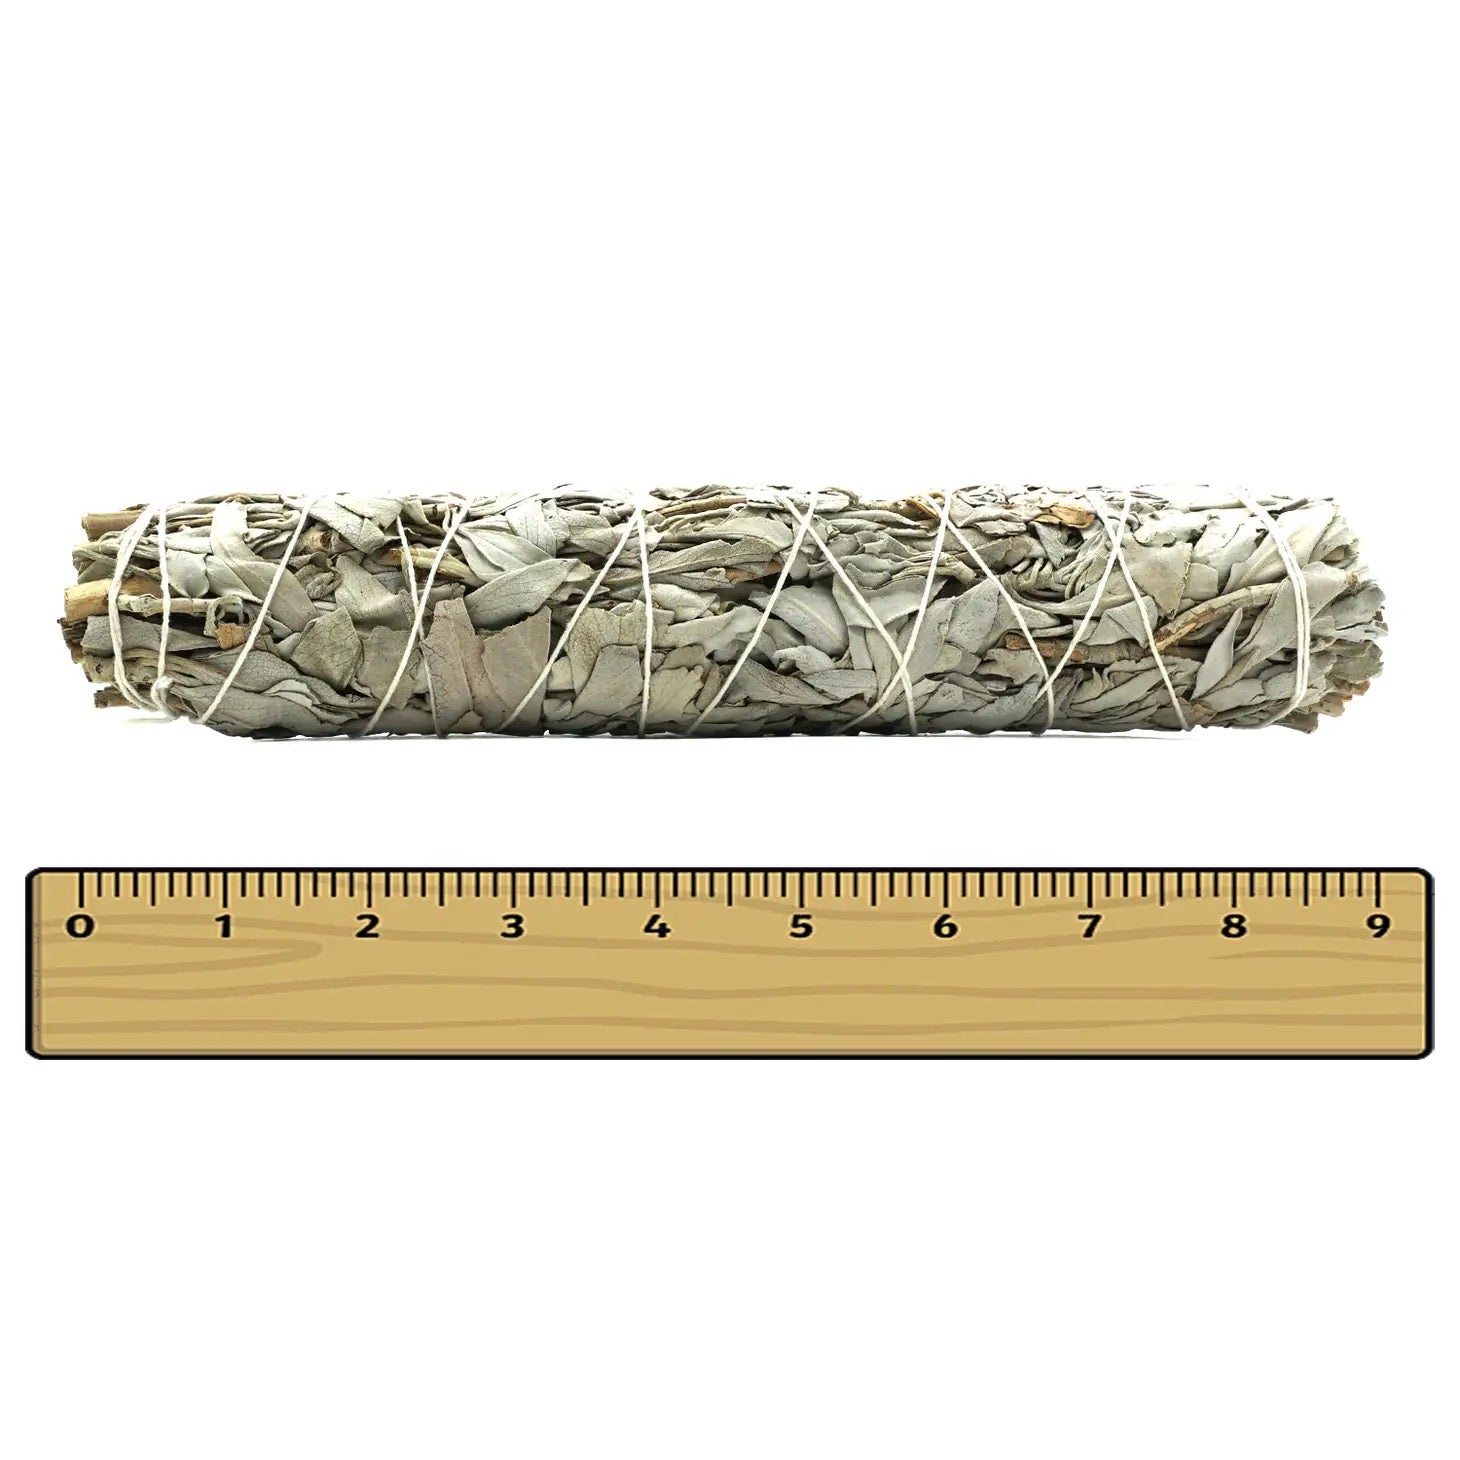 9 Inch White Sage Bundles (Large) from Farm in California